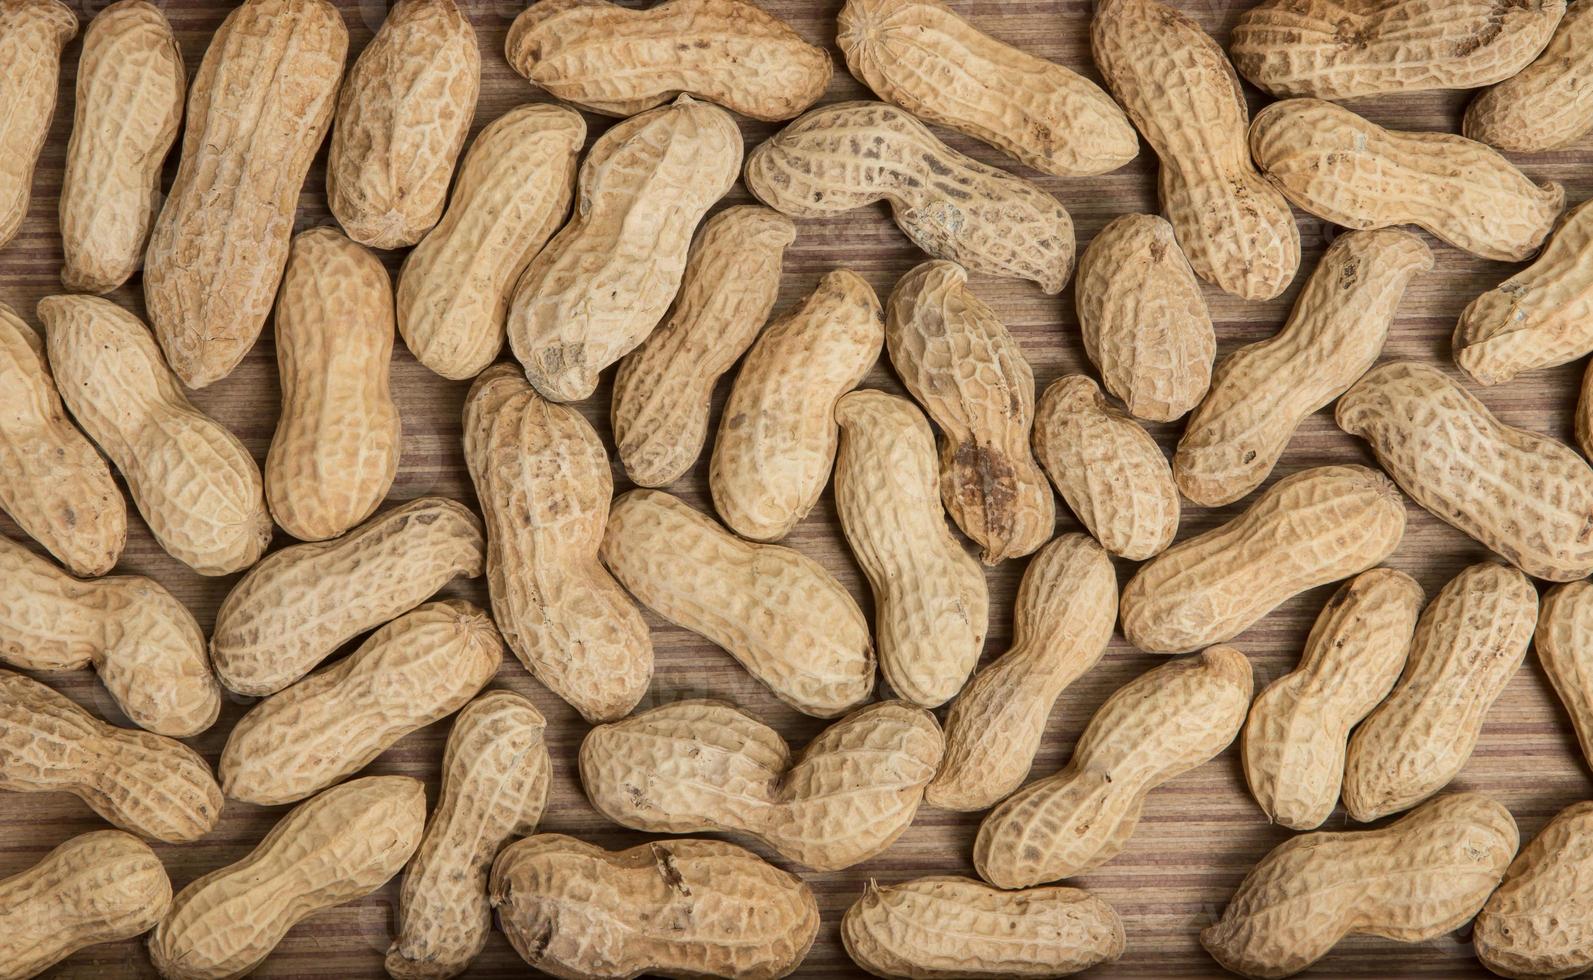 peanuts in shells over wood background photo